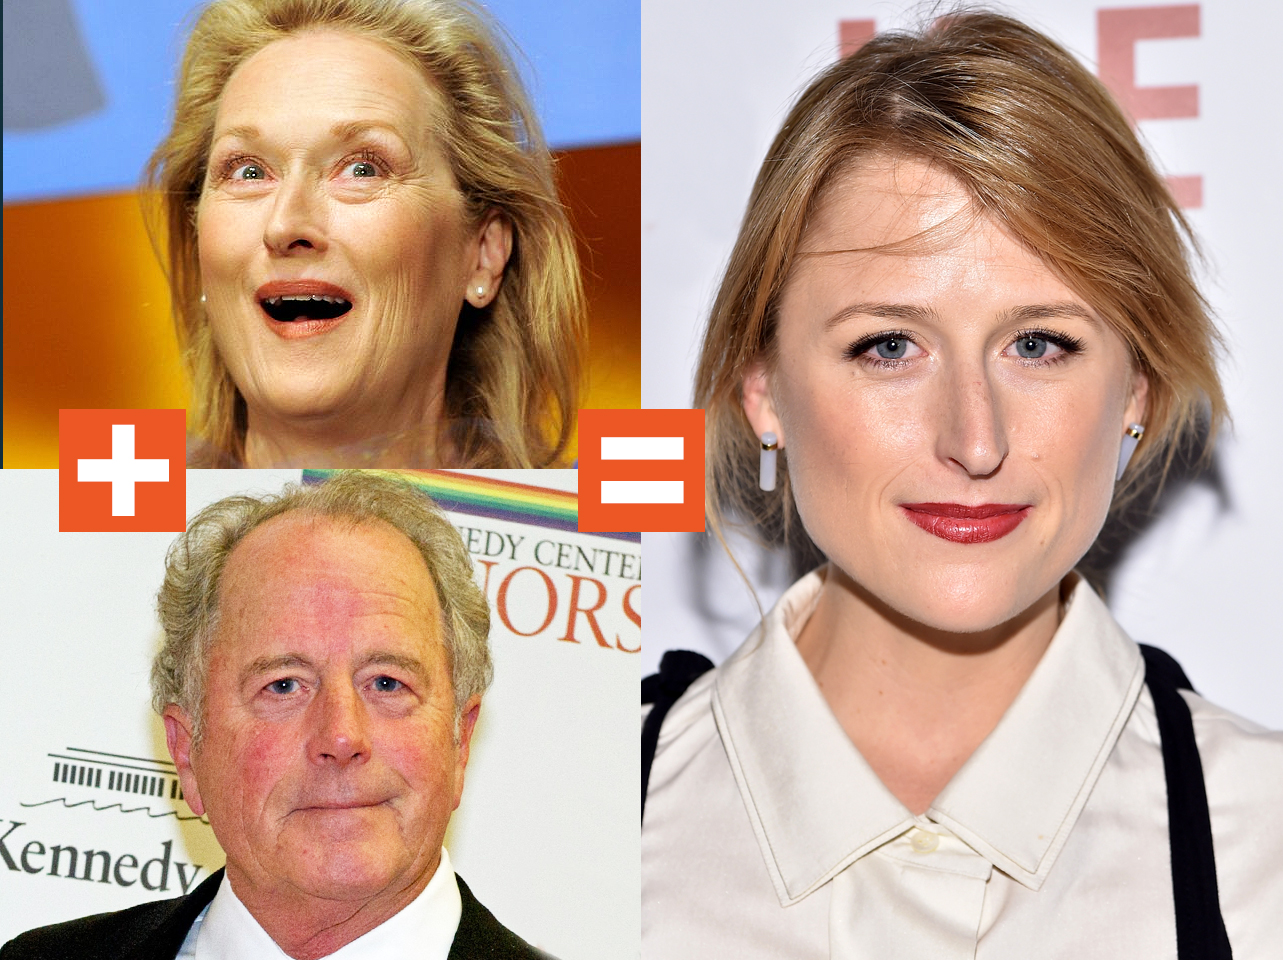 A collage of Meryl Streep, Don Gummer, and Mamie Gummer | Source: Getty Images